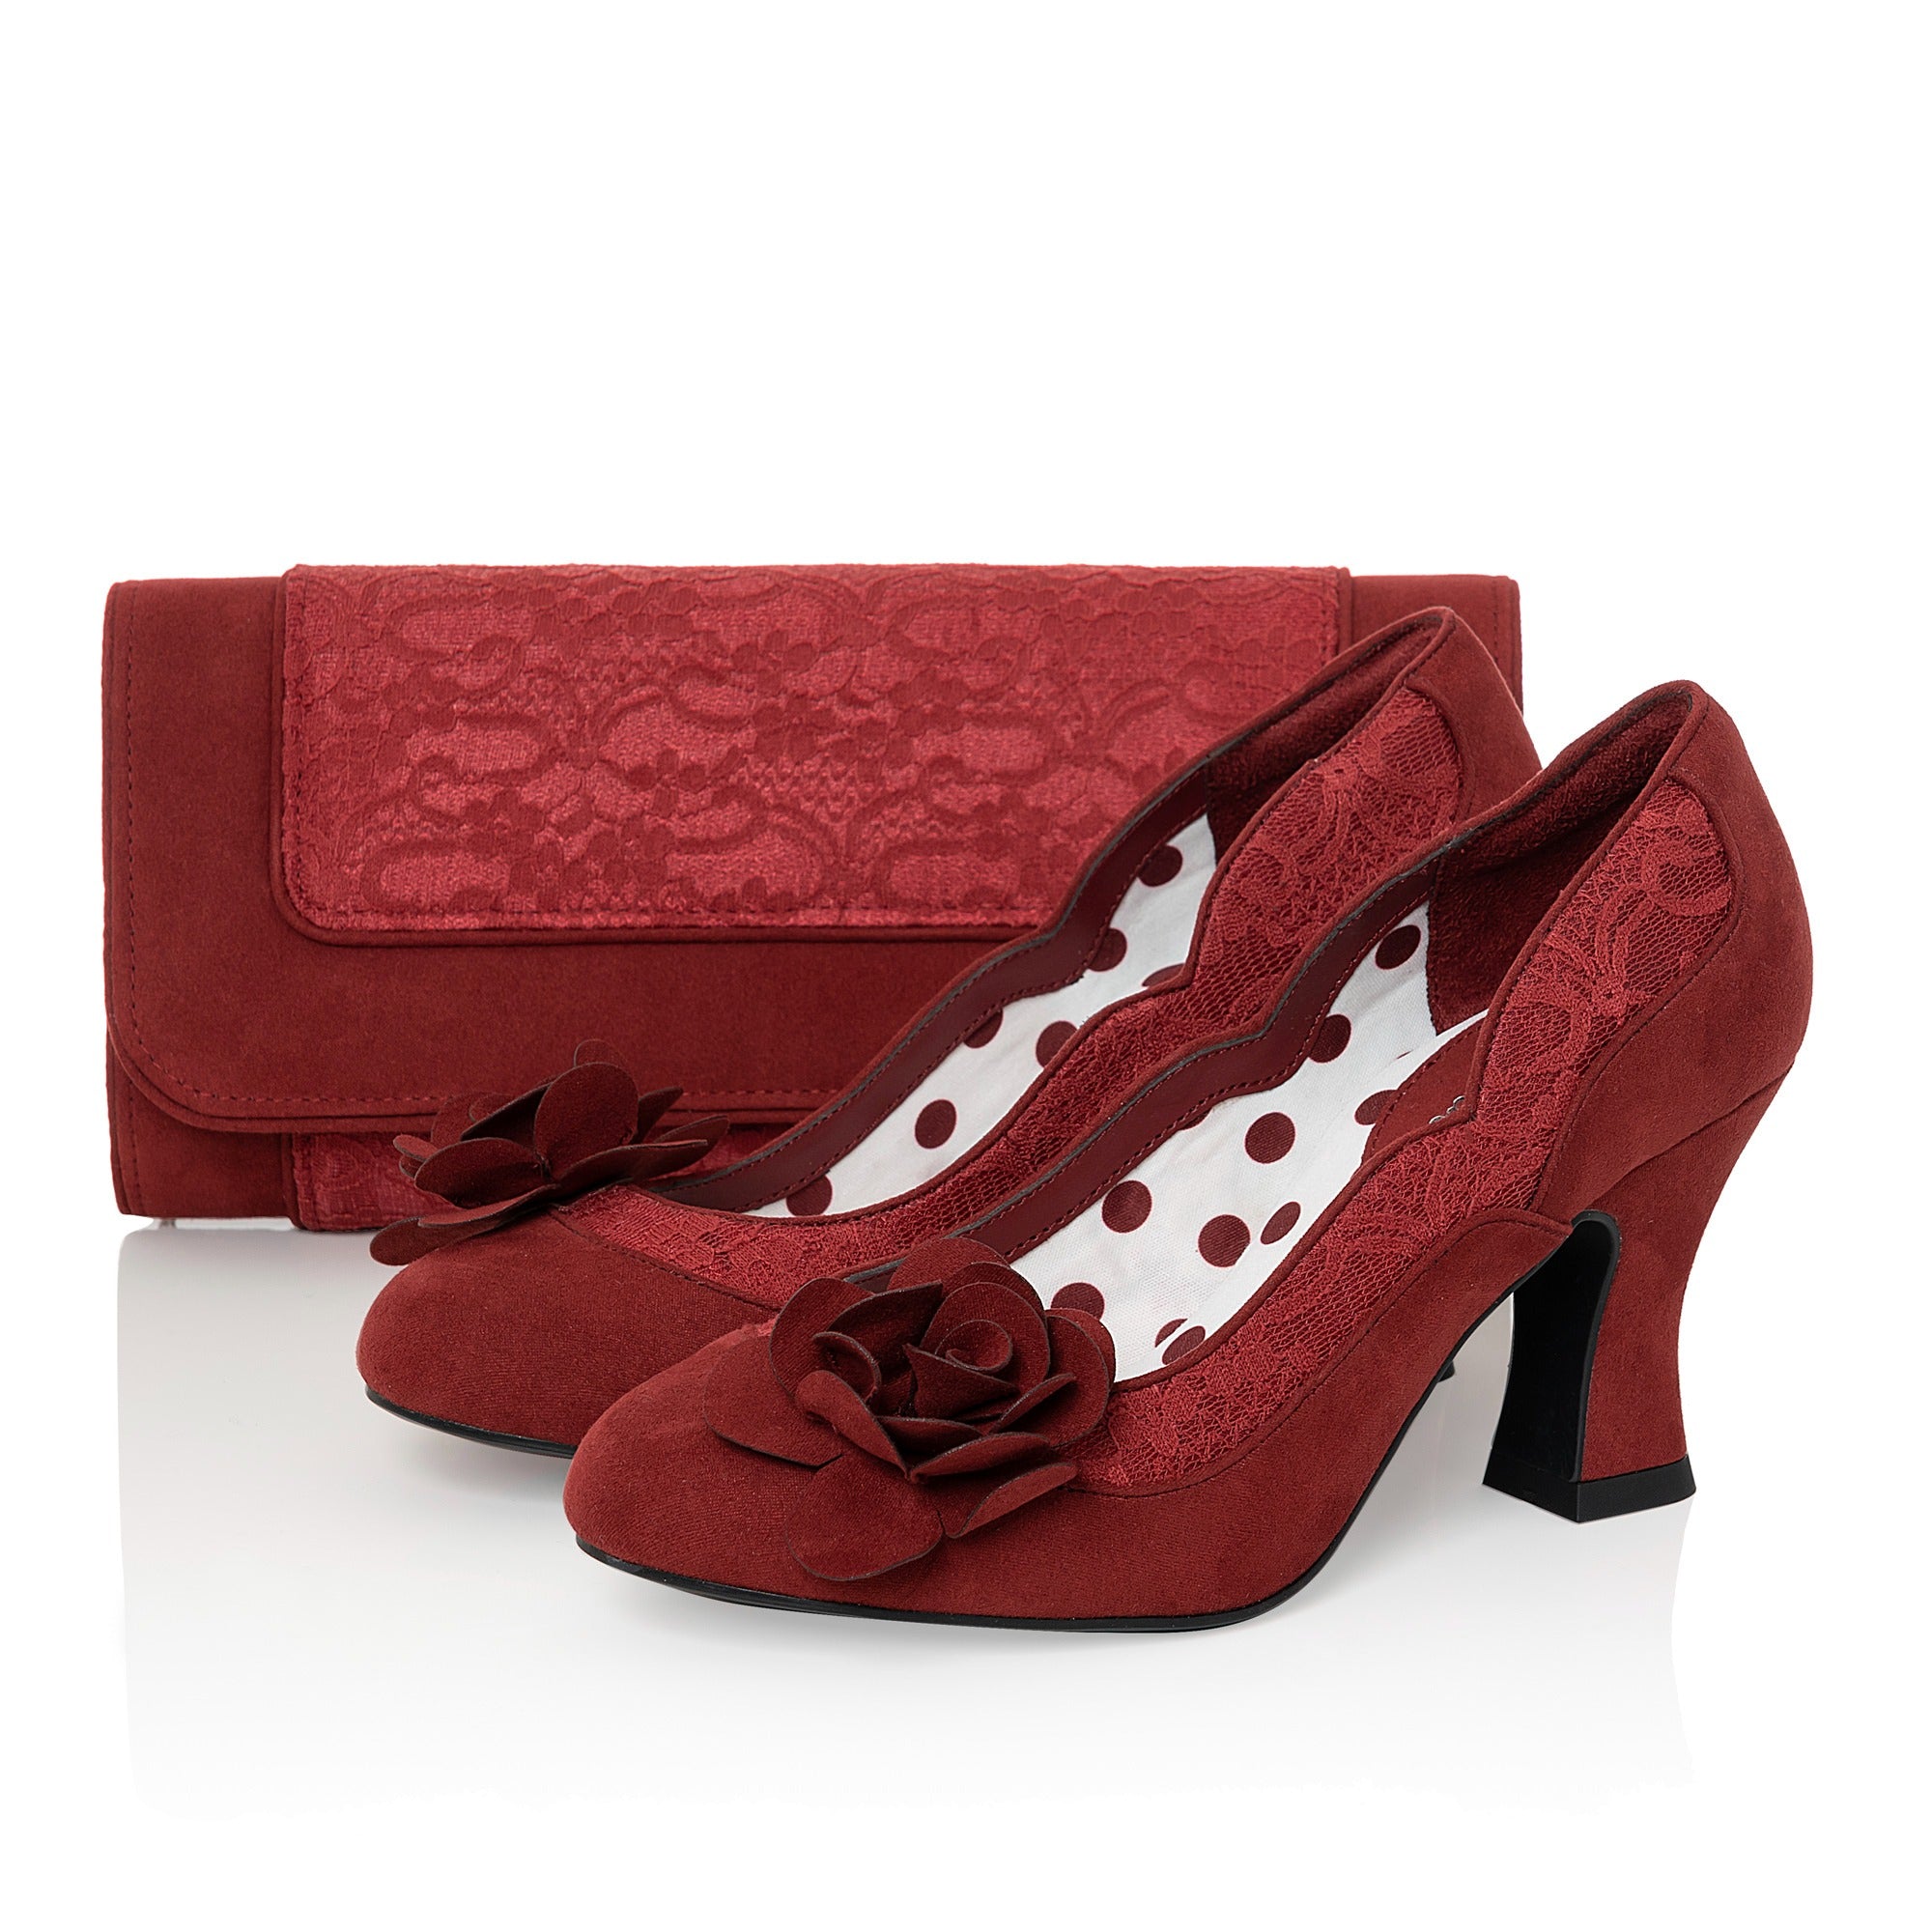 Ruby Shoo Crimson Red Heeled Corsage Court Shoes - Pretty Kitty Fashion